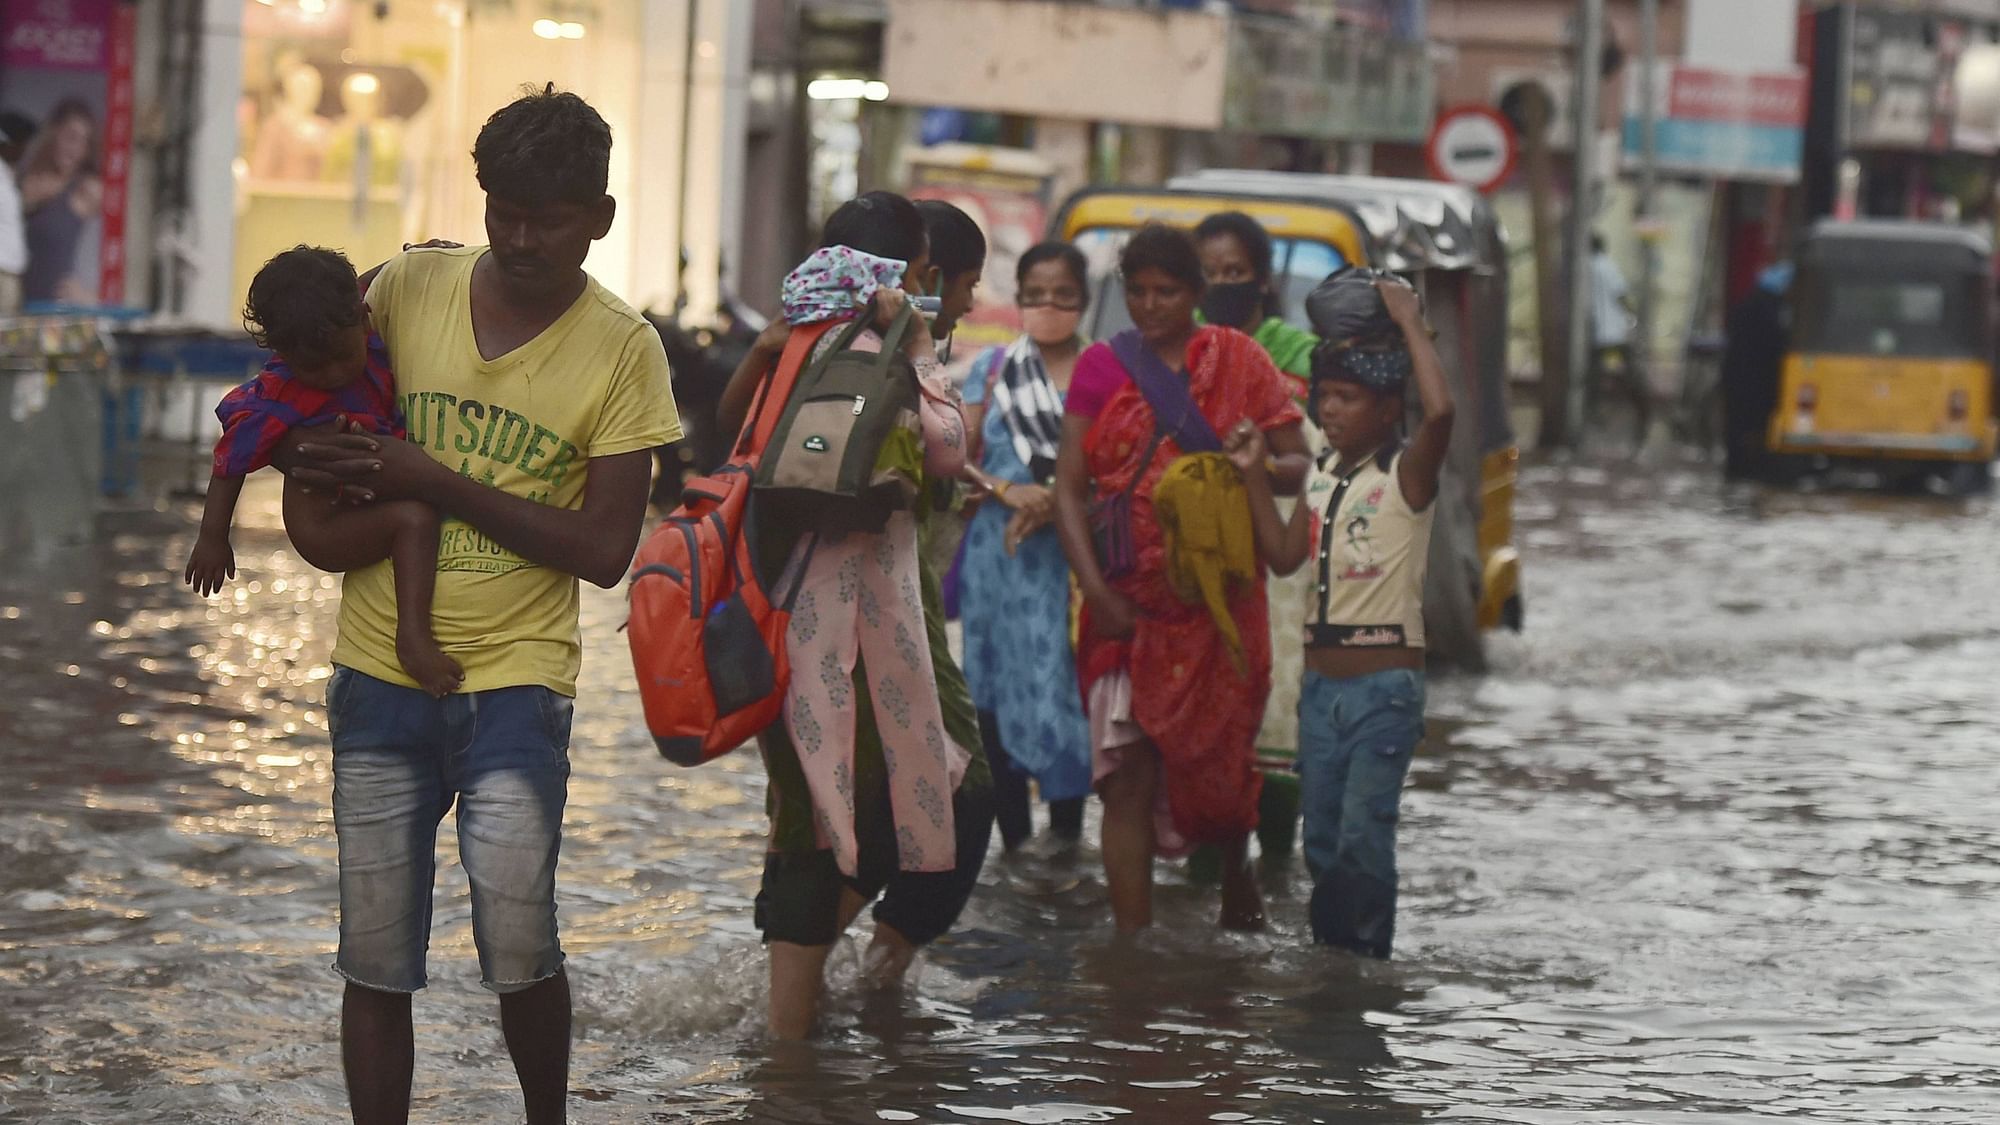 Over 1 lakh people have been evacuated and rescue teams are on alert across Tamil Nadu and Puducherry.